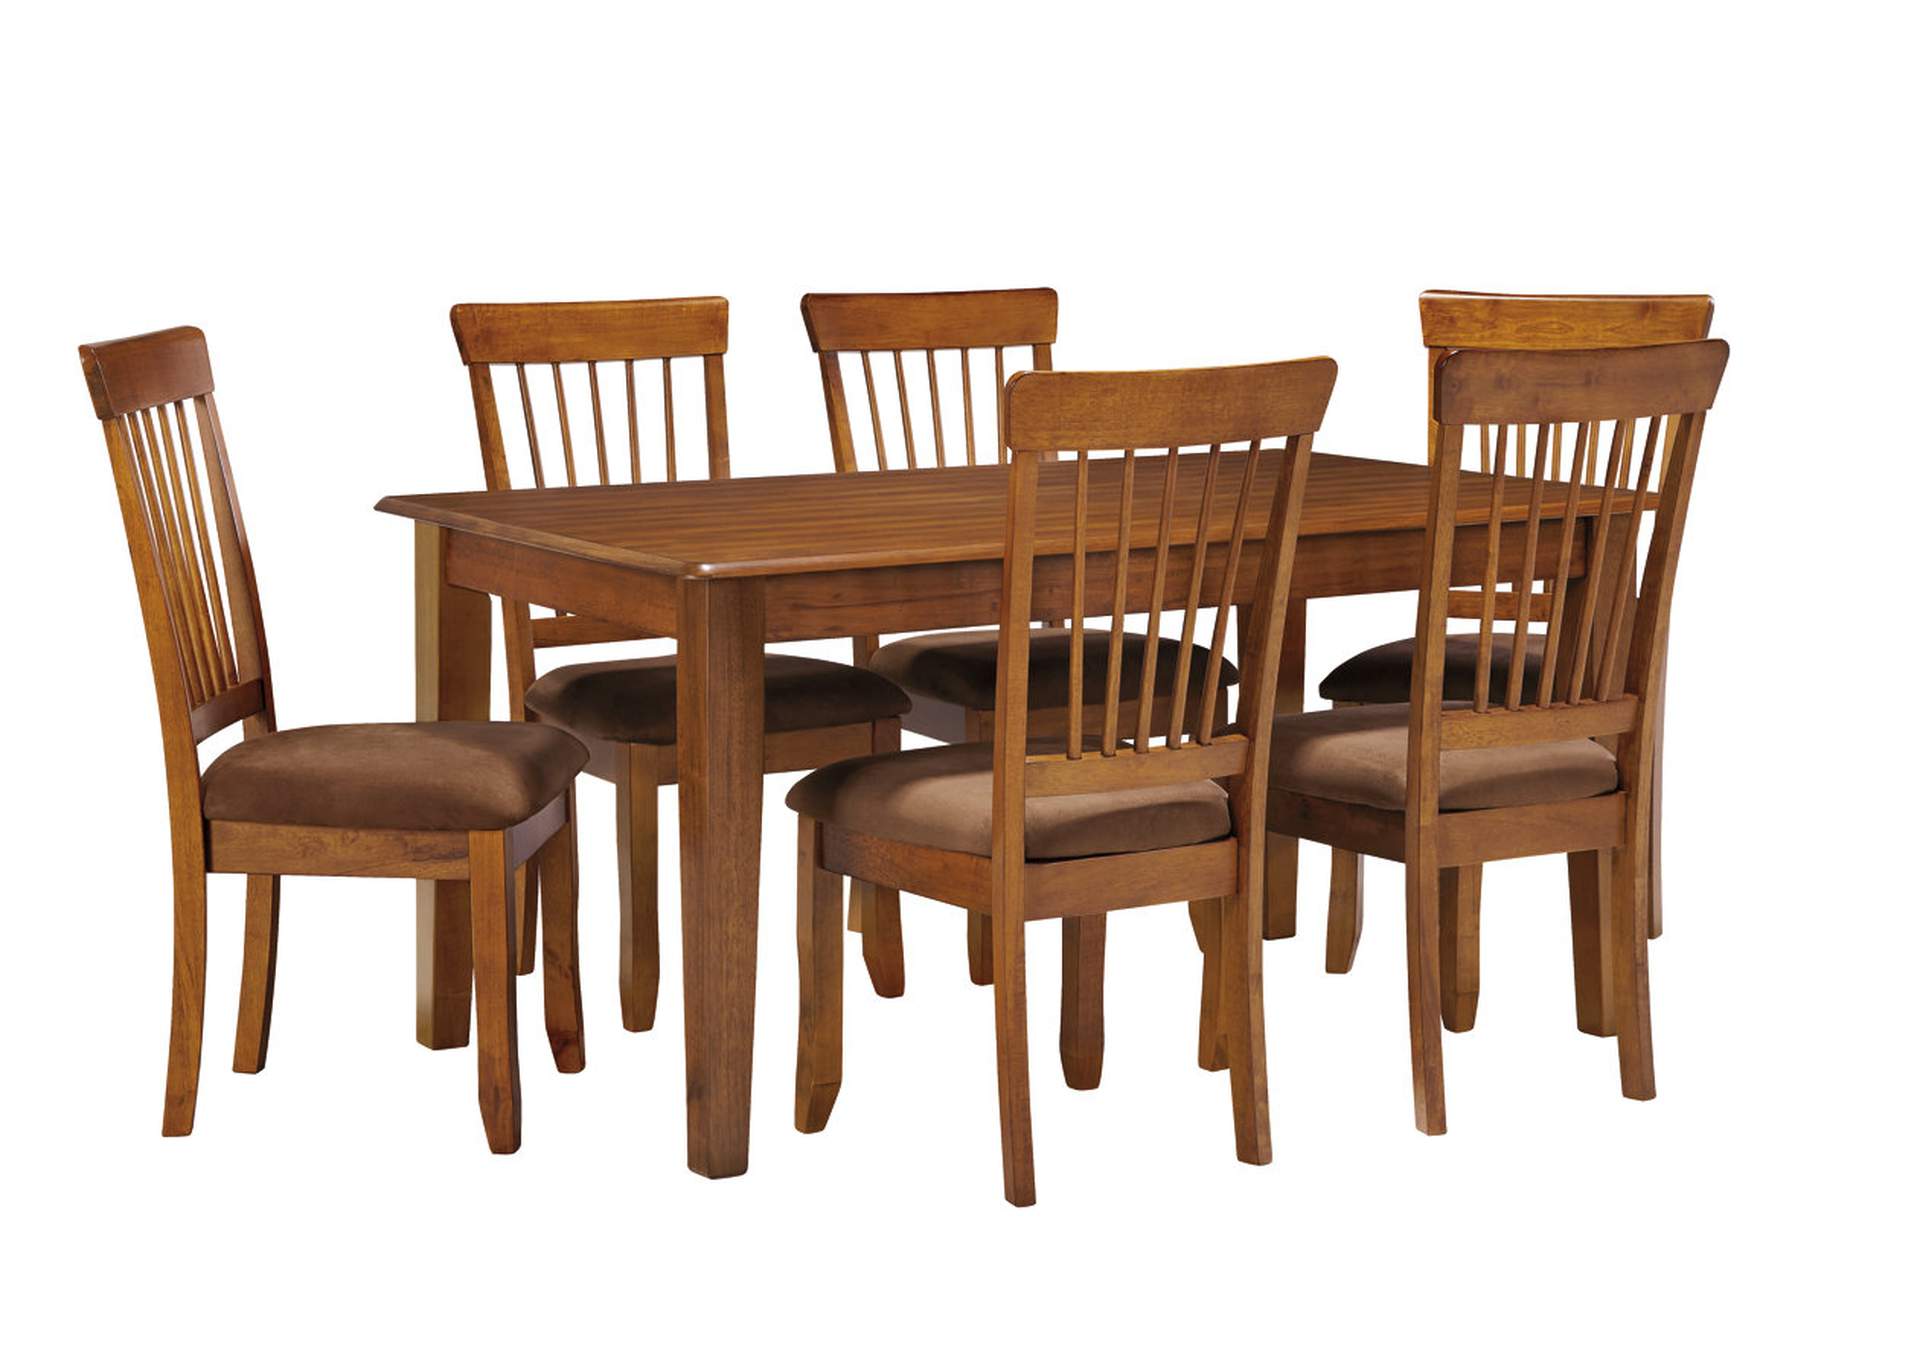 Berringer Dining Table and 6 Chairs,Ashley